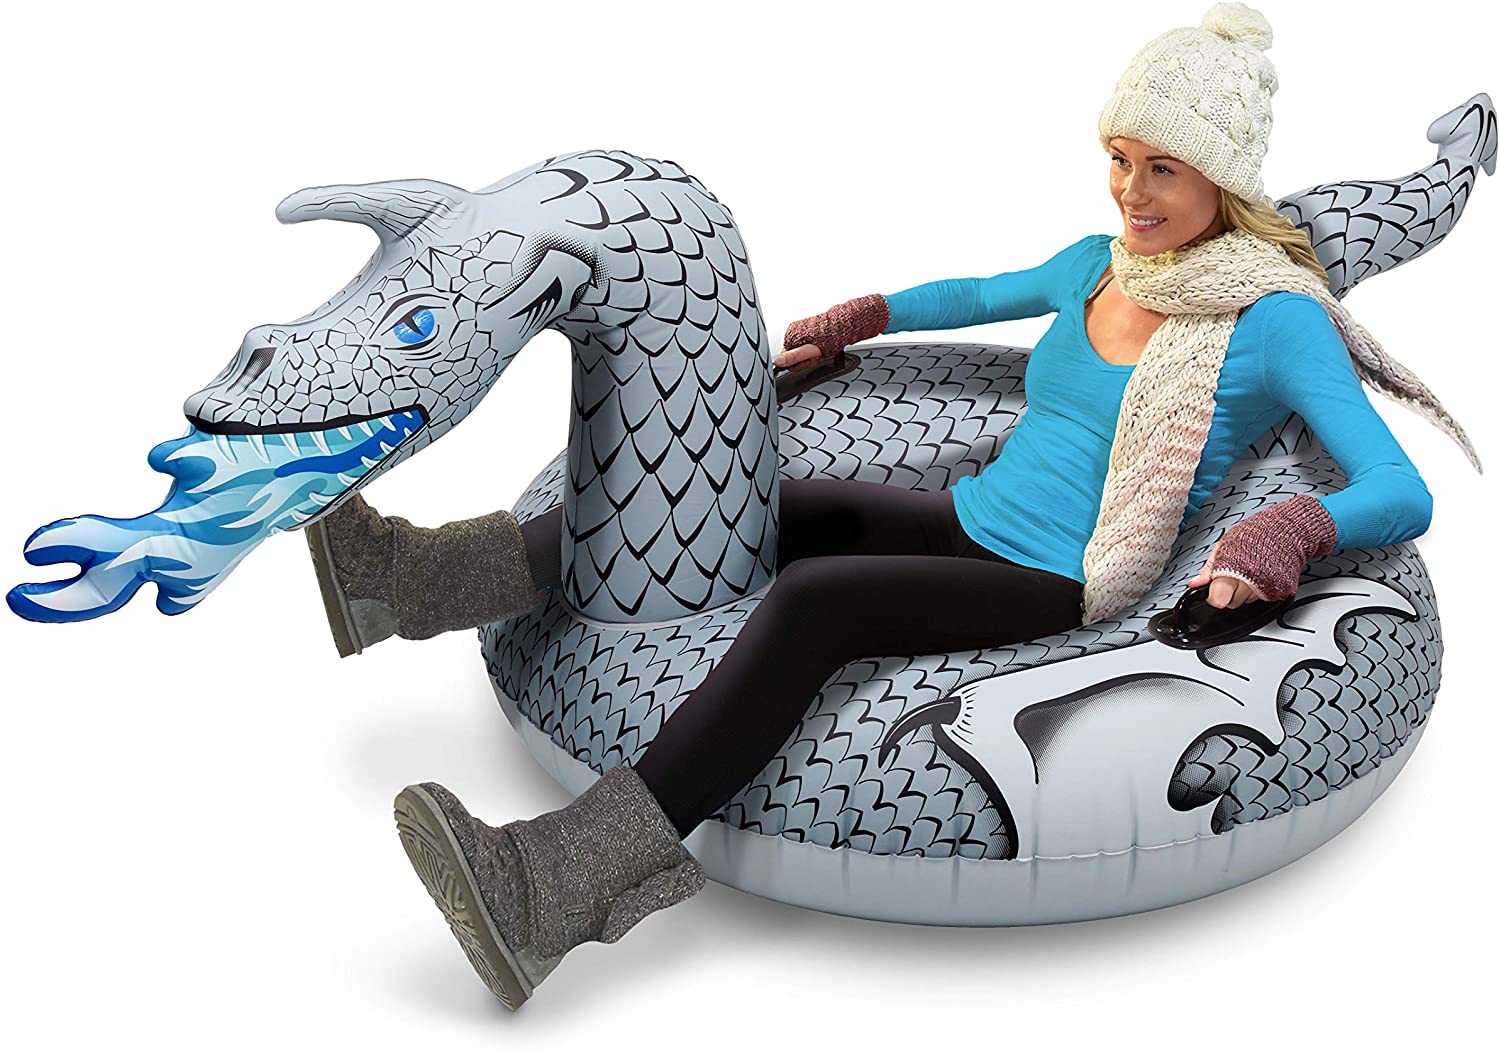 GoFloats Winter Snow Tube - Inflatable Sled for Kids and Adults (Choose from Unicorn, Ice Dragon, Polar Bear, Penguin, Flamingo)